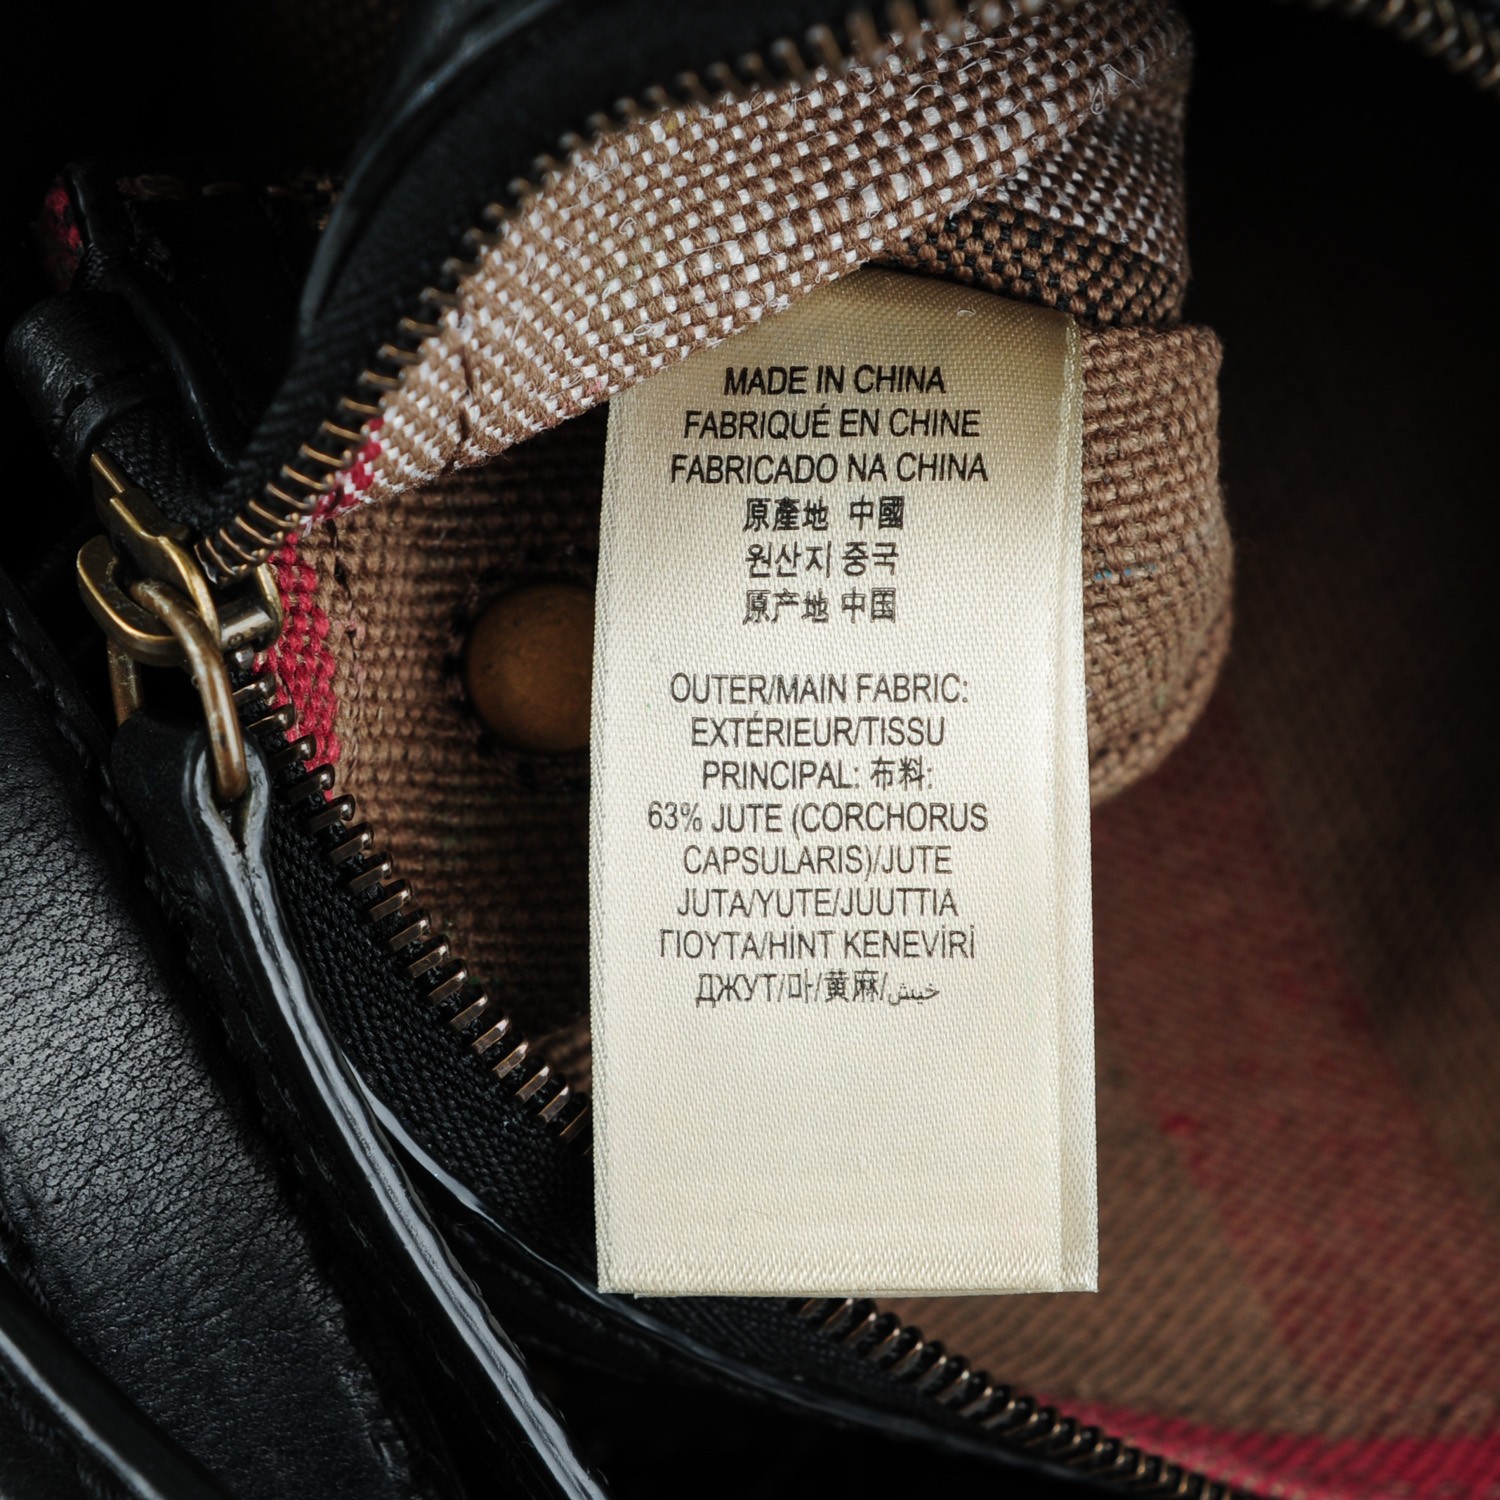 burberry bag made in china